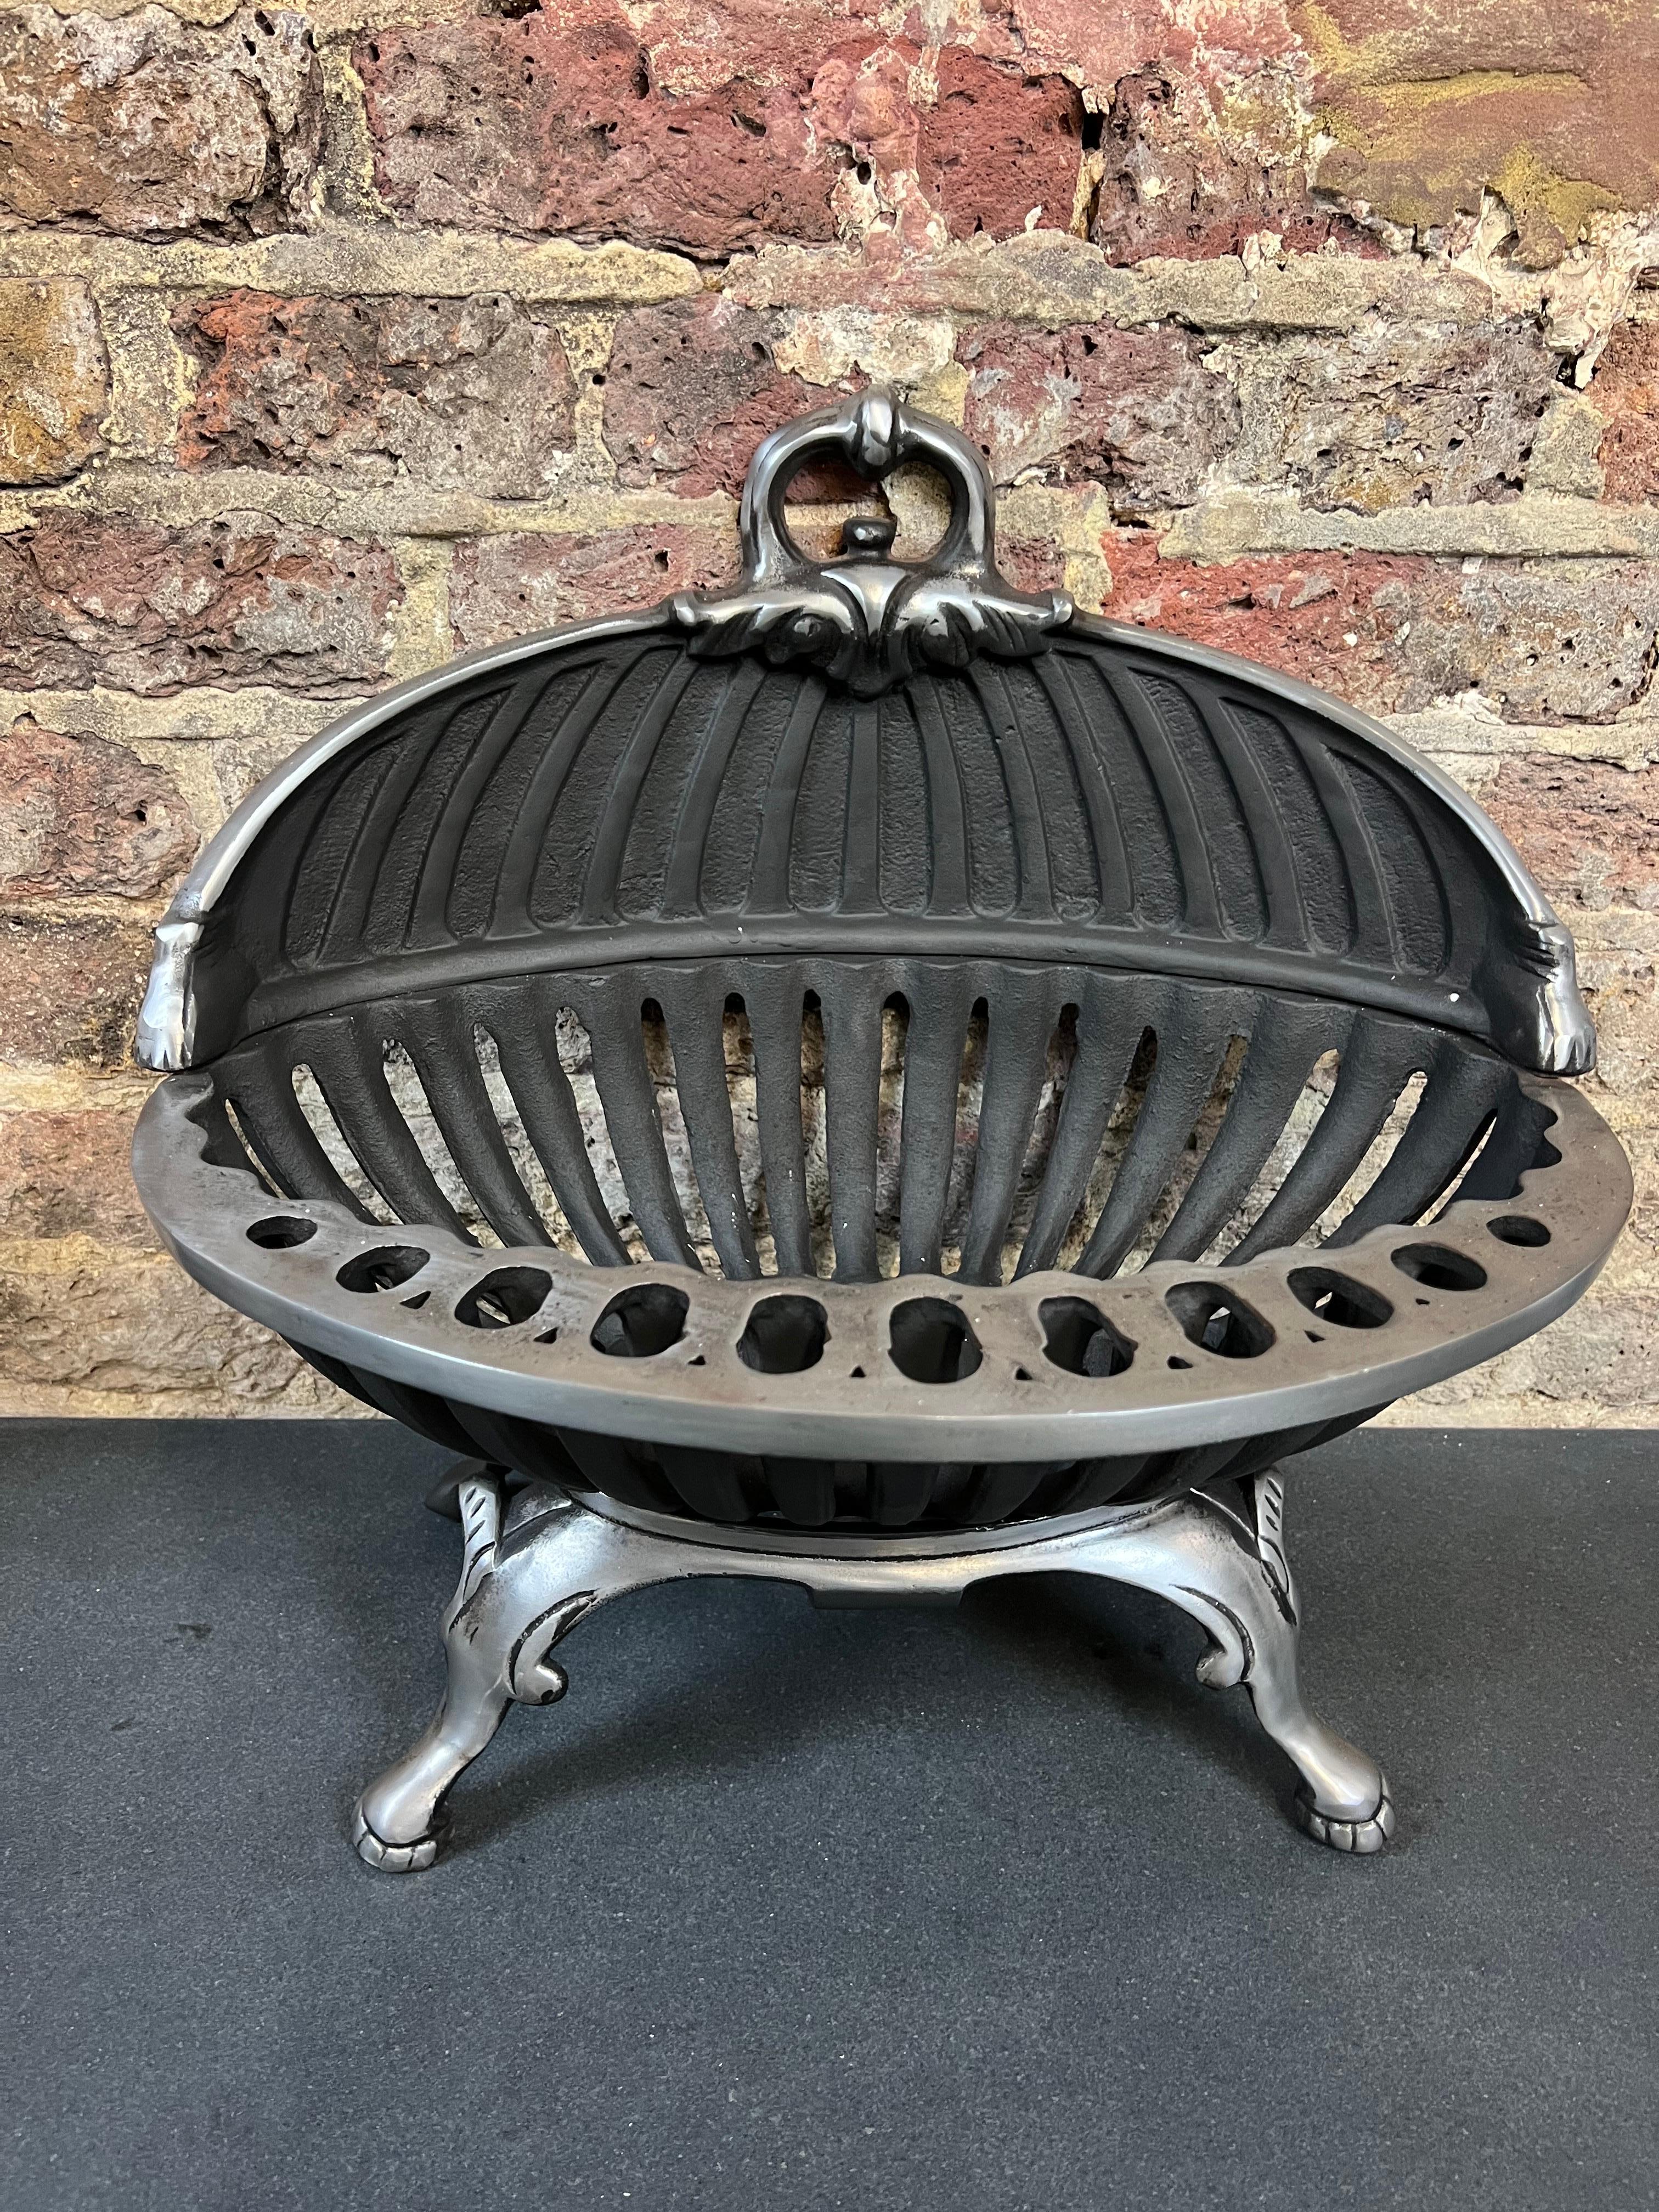 20th century cast-iron fireplace basket.
This Chestnut slotted fire grate has decorative paws and is in a burnished (polished iron) finish. It has a decorative Handel at the top which makes it easy to move when required.

Dimensions:
Width 18